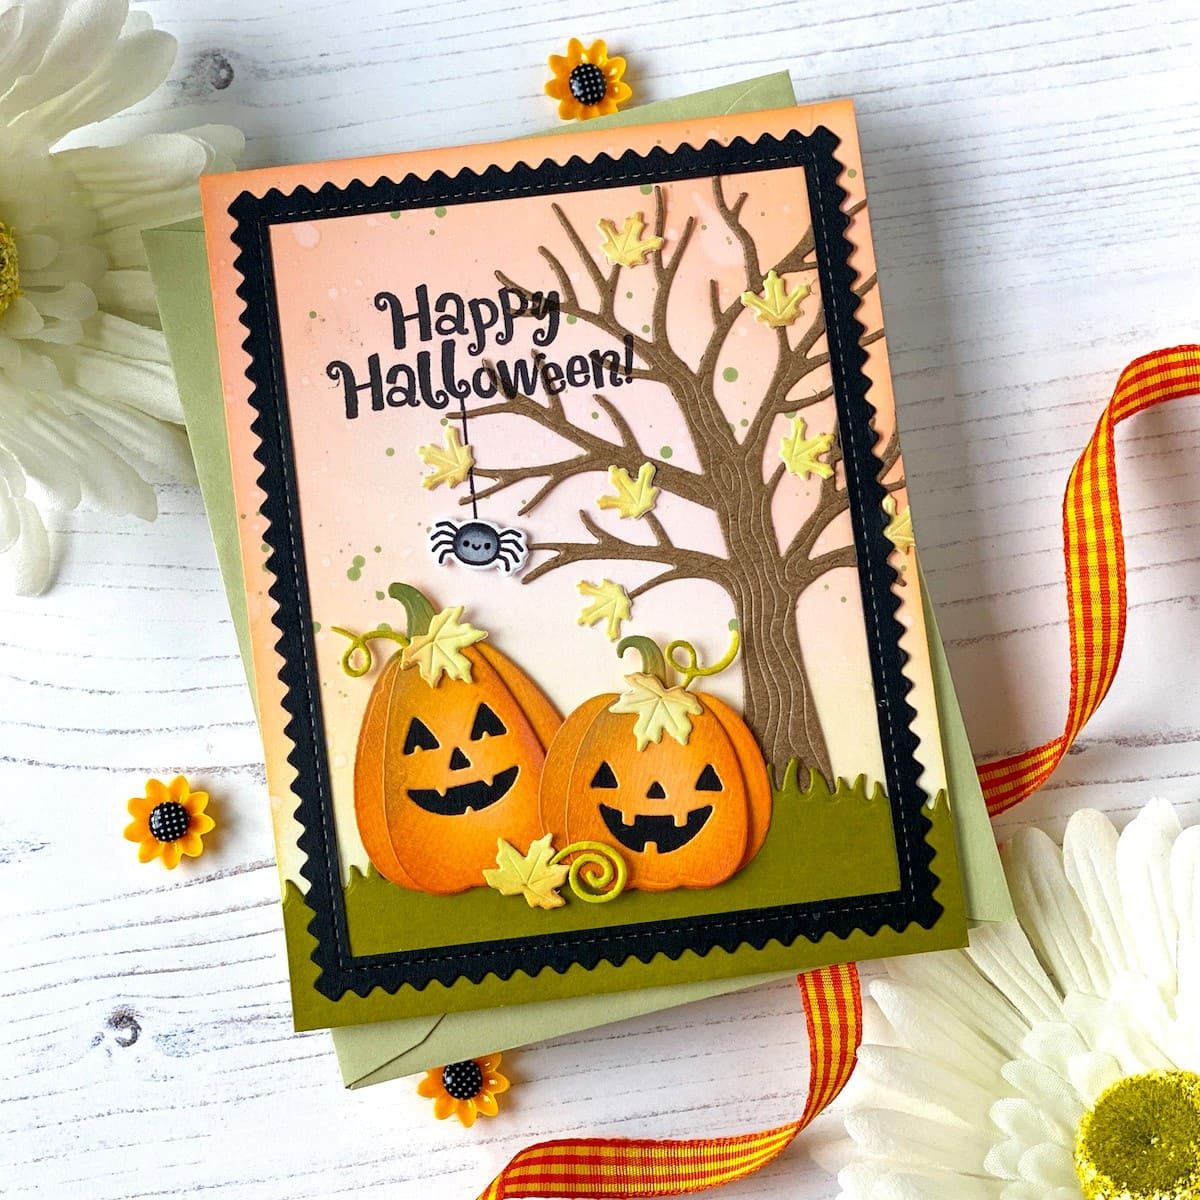 Sunny Studio Stamps Jack O'Lantern Pumpkins With Hanging Spider Halloween Card (using Autumn Tree Metal Cutting Dies)